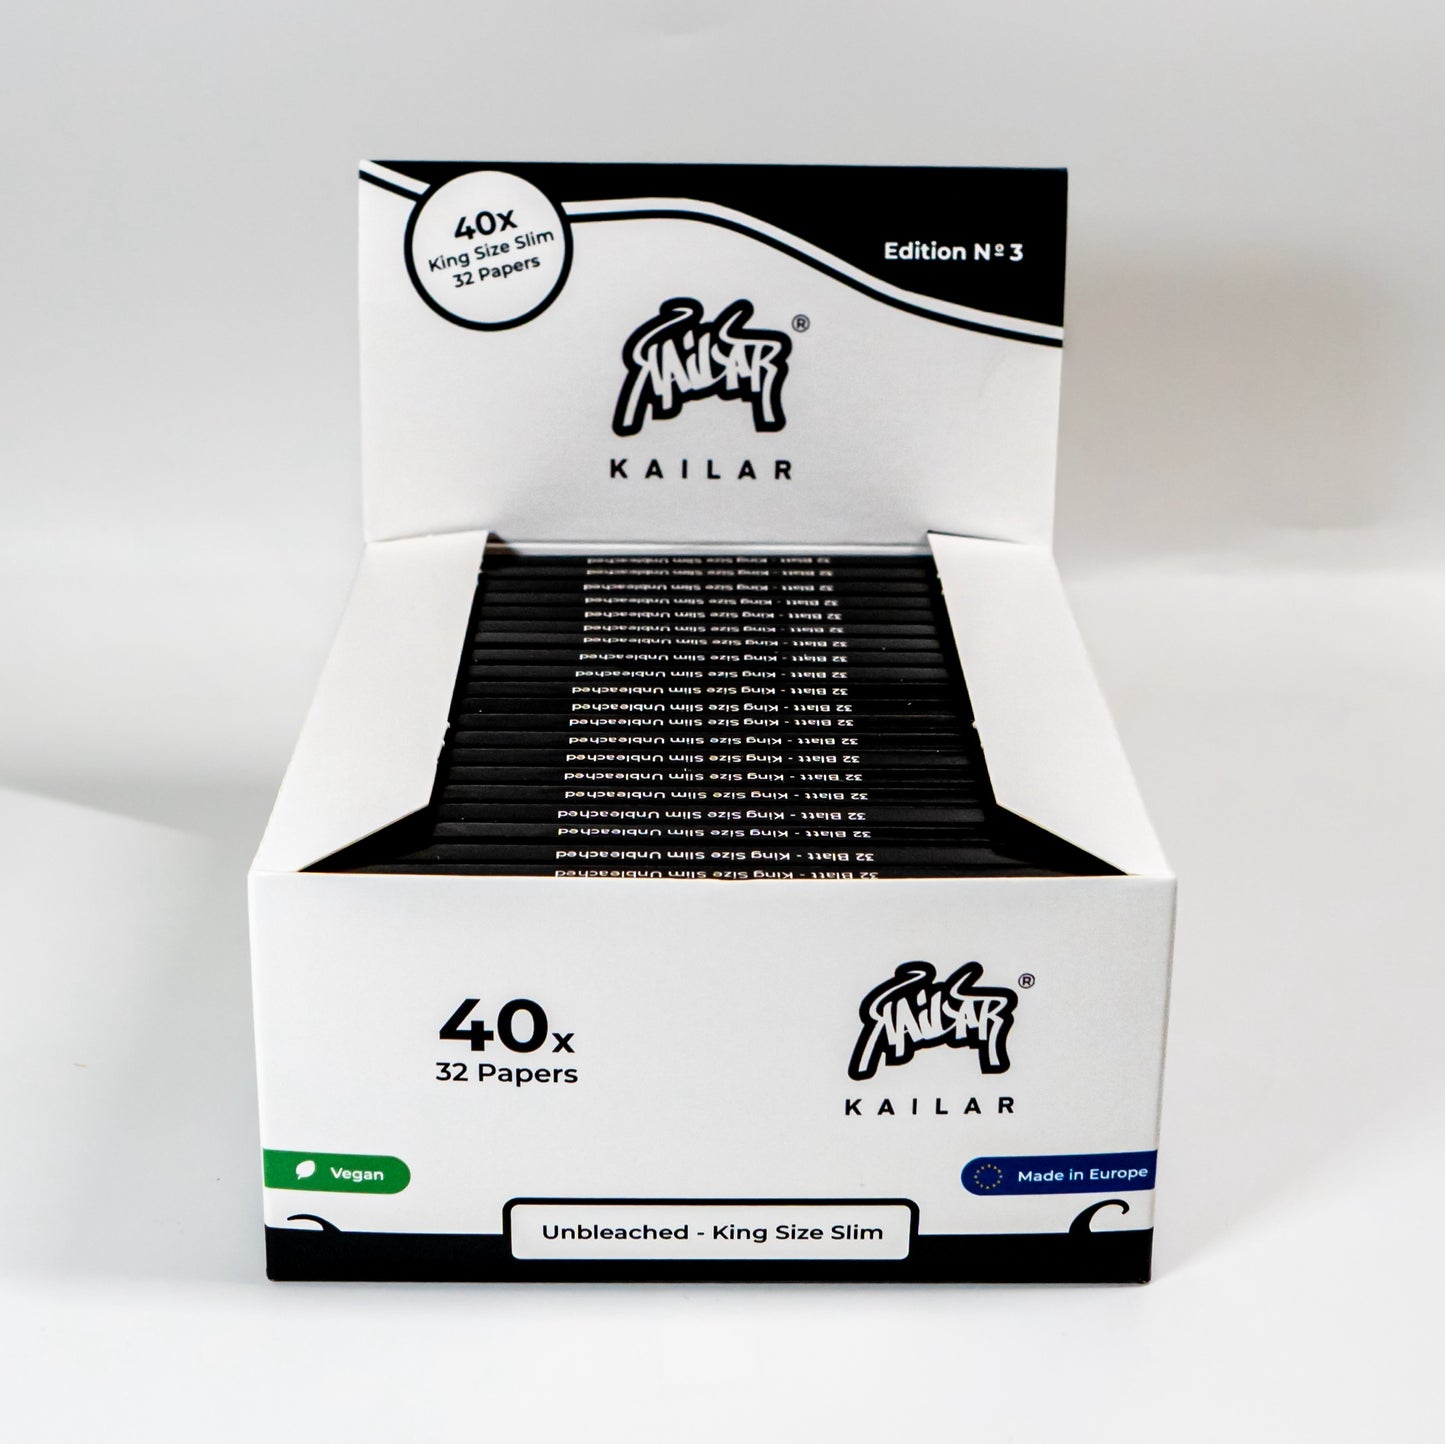 Ikarus x Kailar Unbleached King Size Slim Longpapes Edition 3